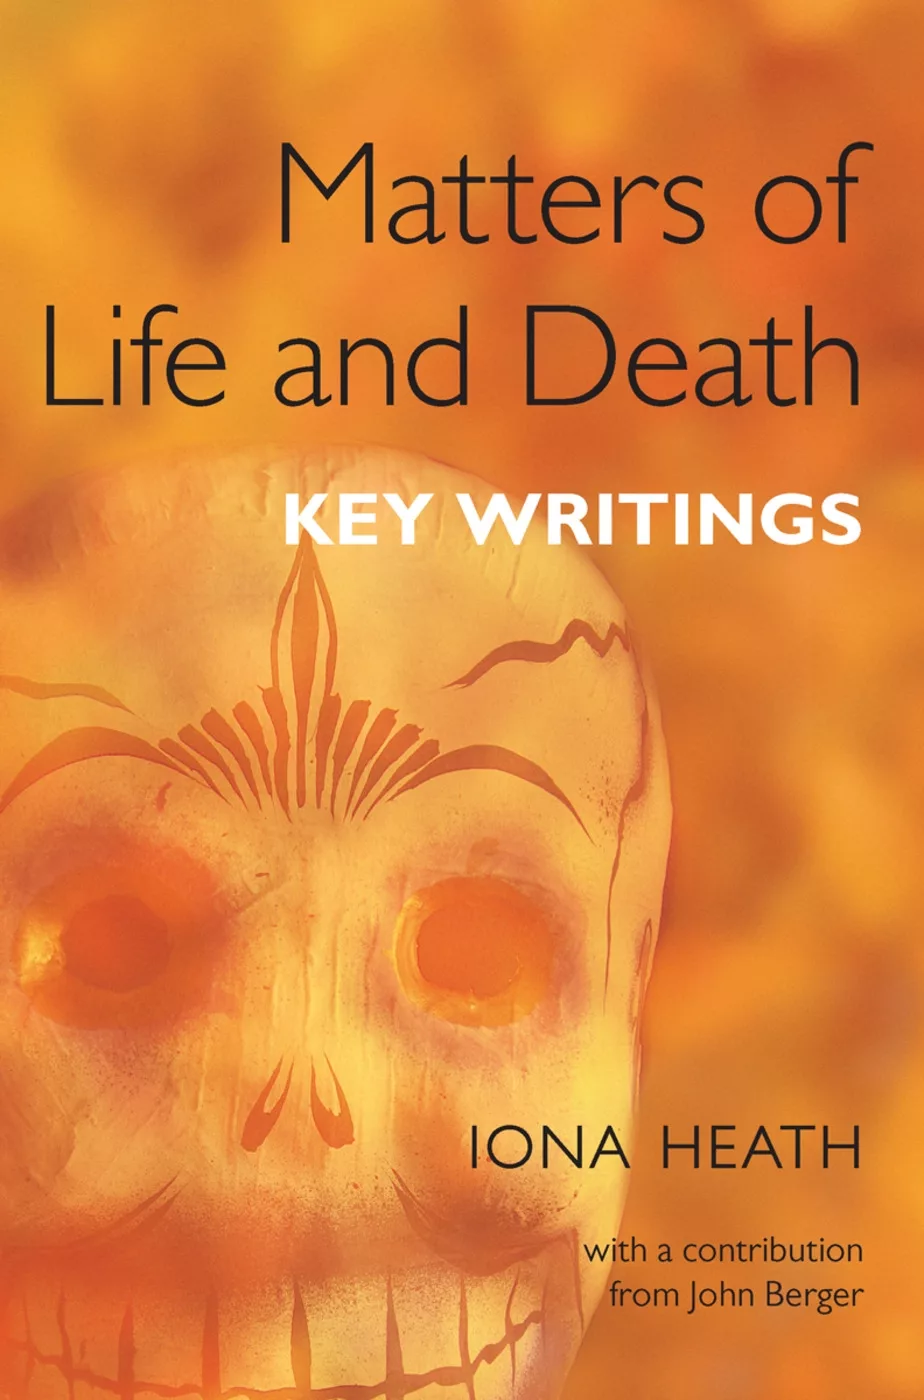 Matters of Life and Death: Key Writings